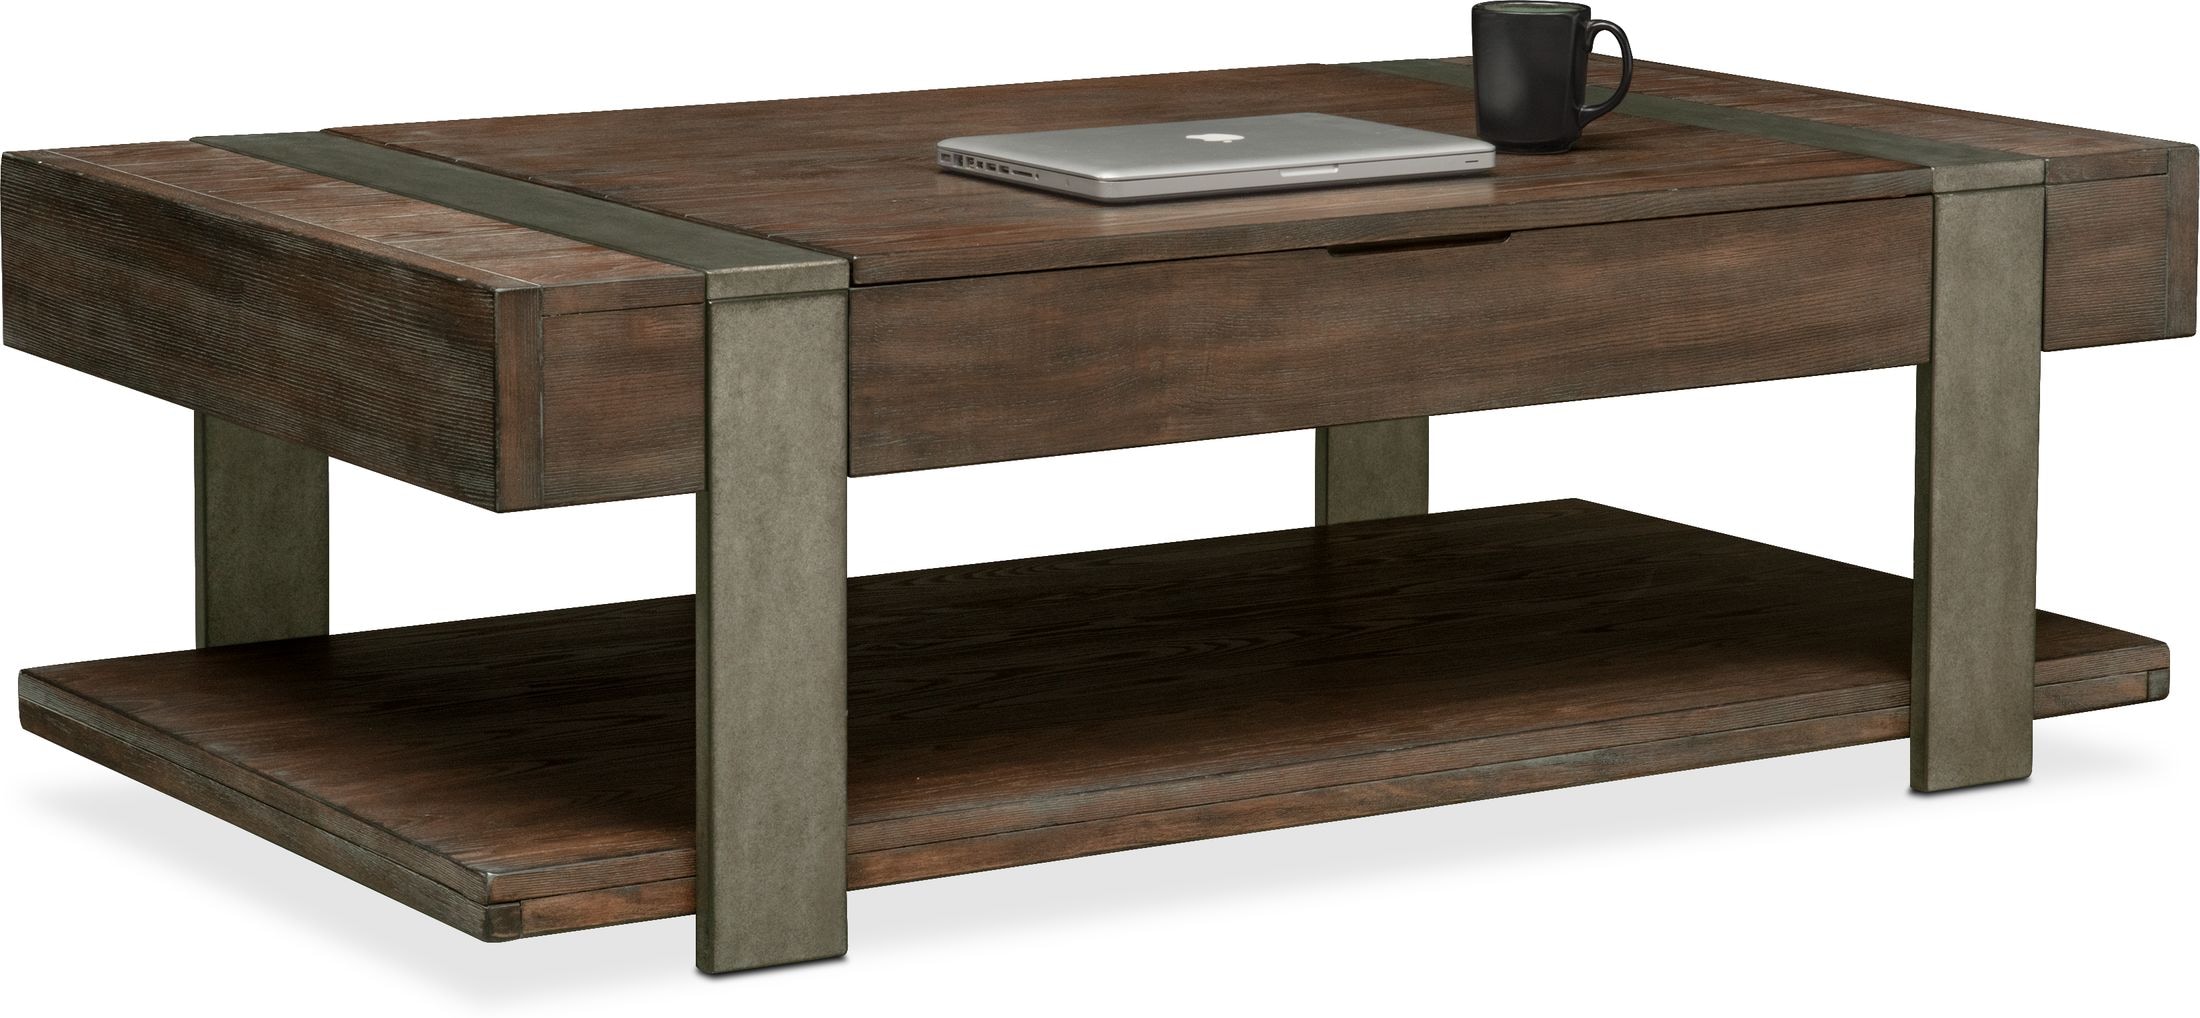 rustic lift top coffee table with storage